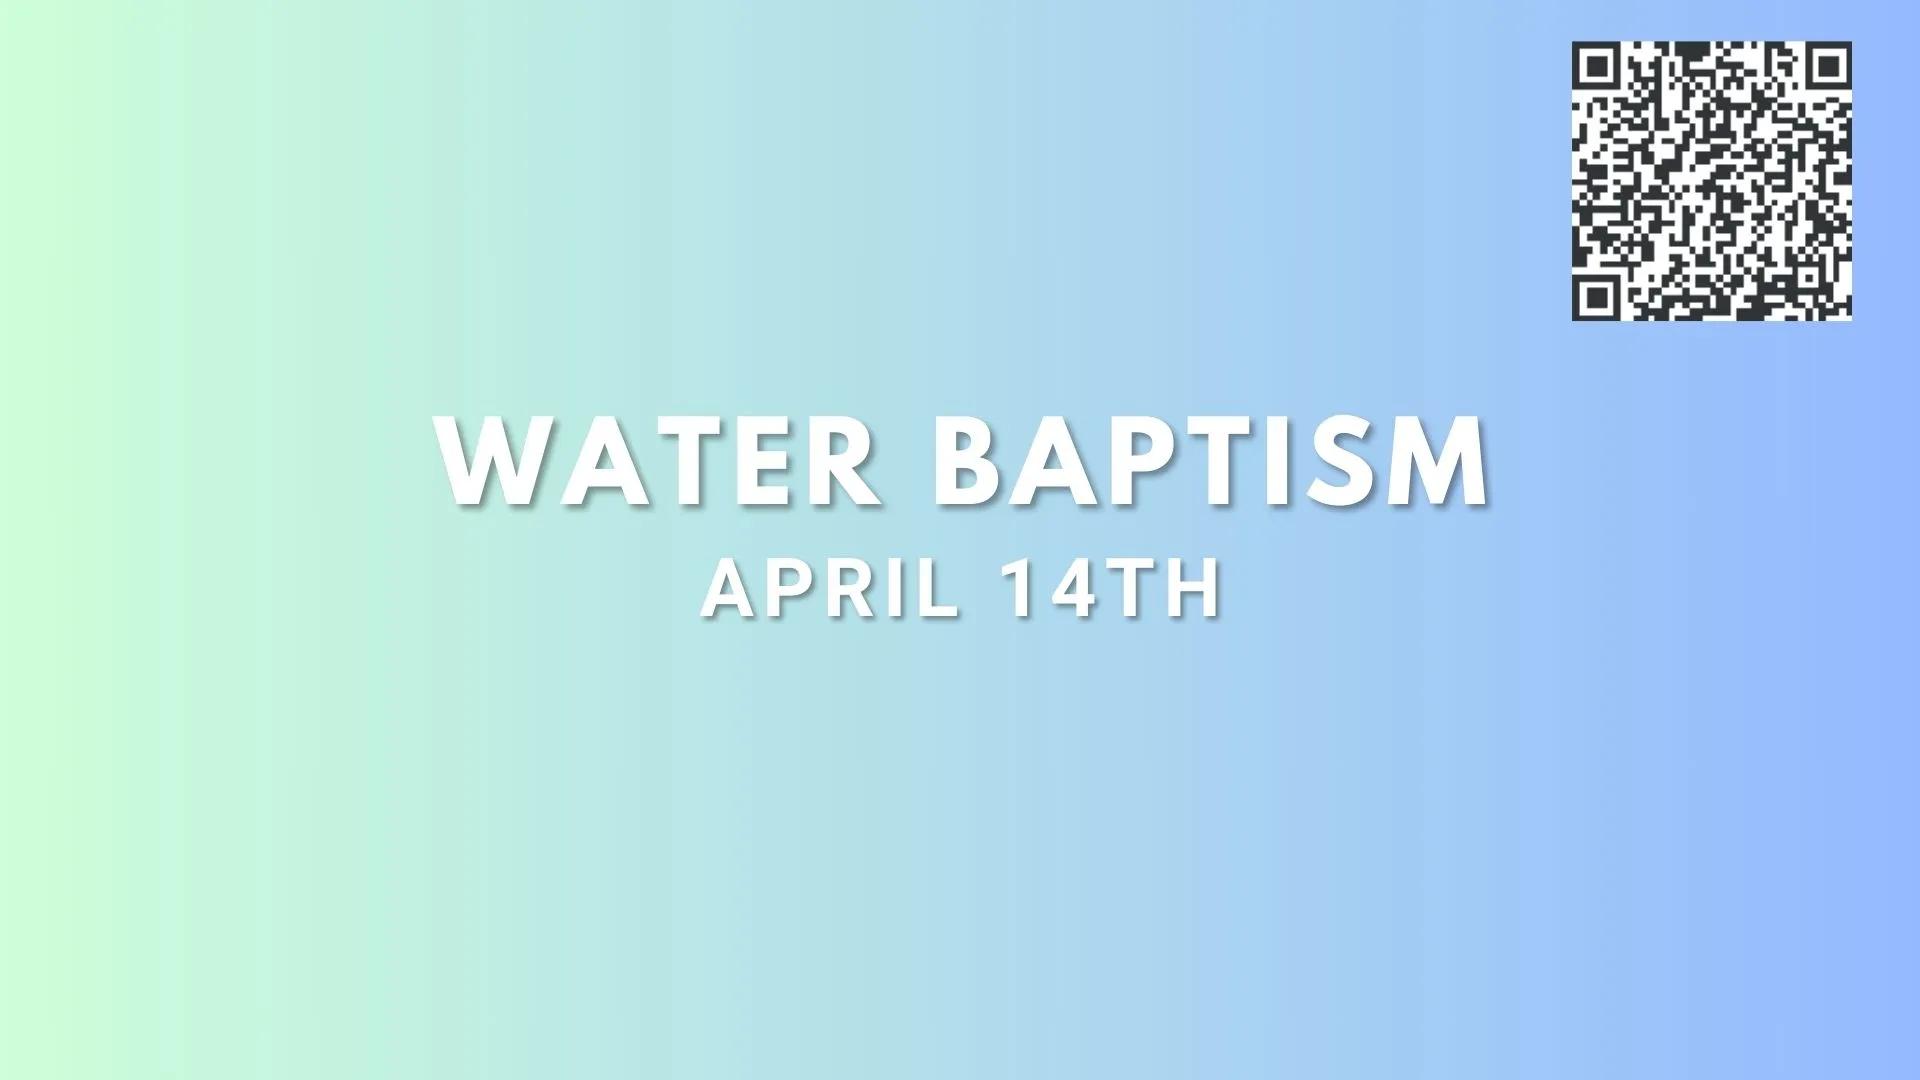 A light blue gradient with "water baptism" written over it in white text